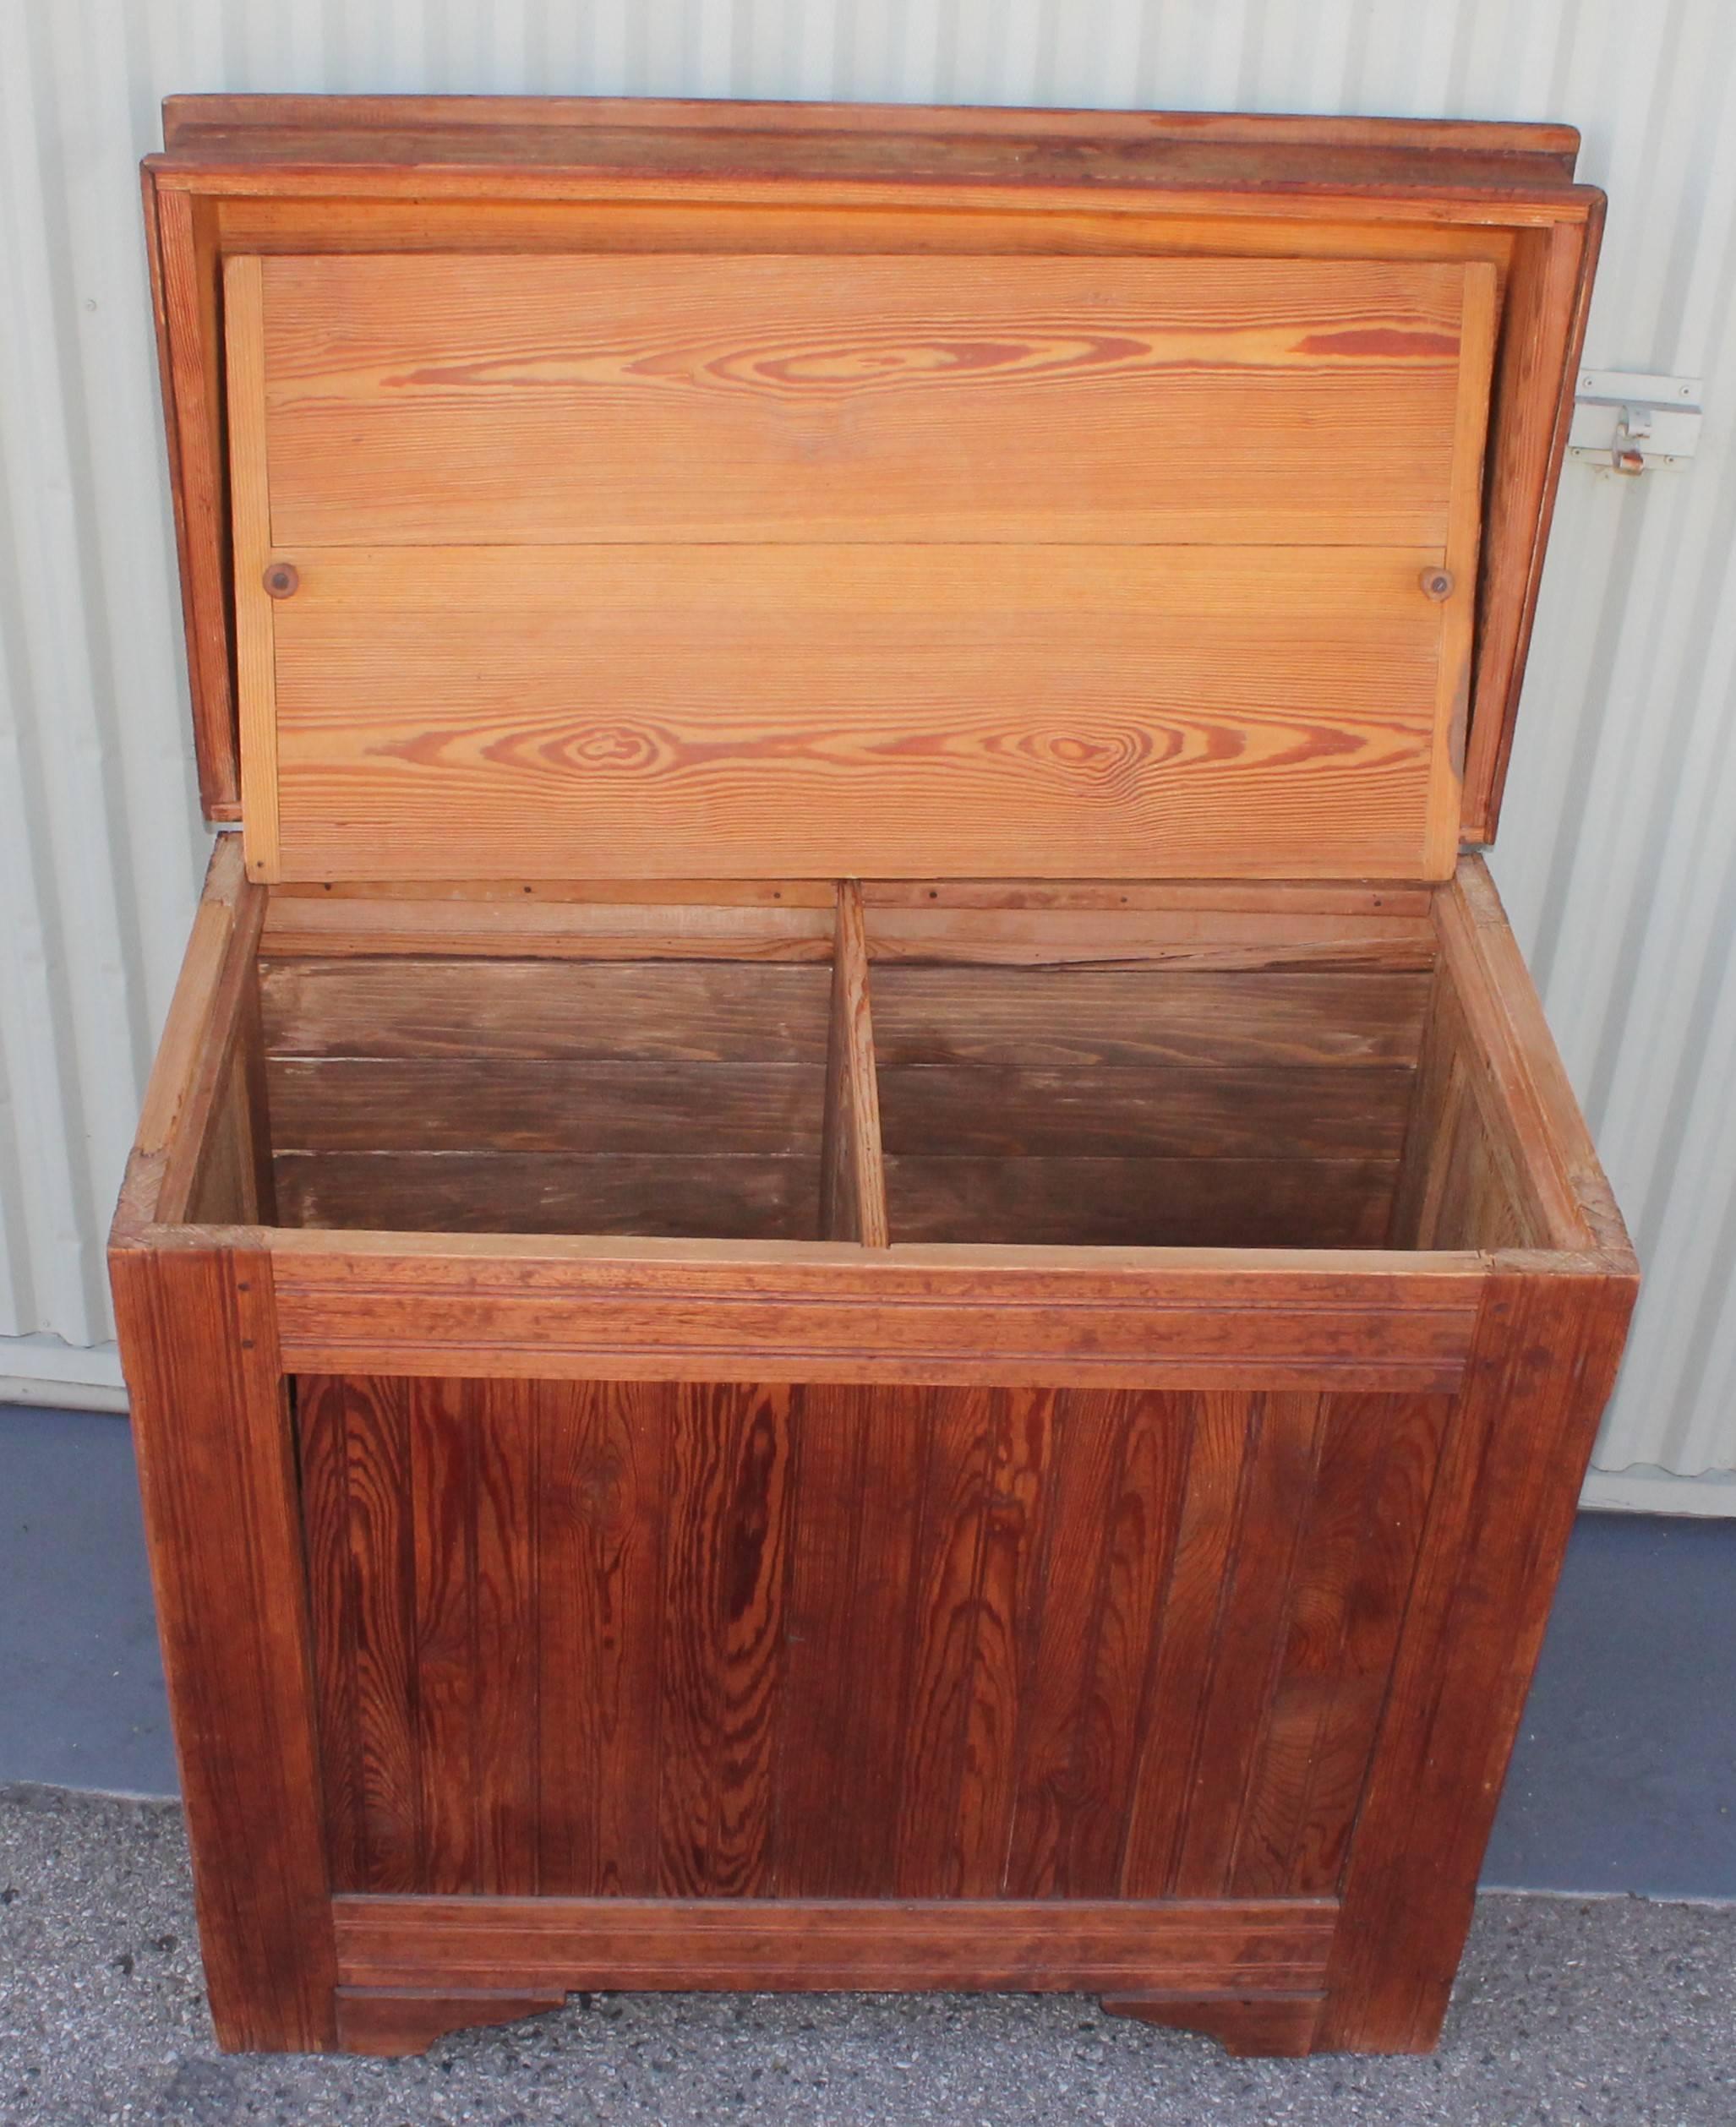 Country 19th Century Rustic Pine Feed Bin with Bread Board Built In